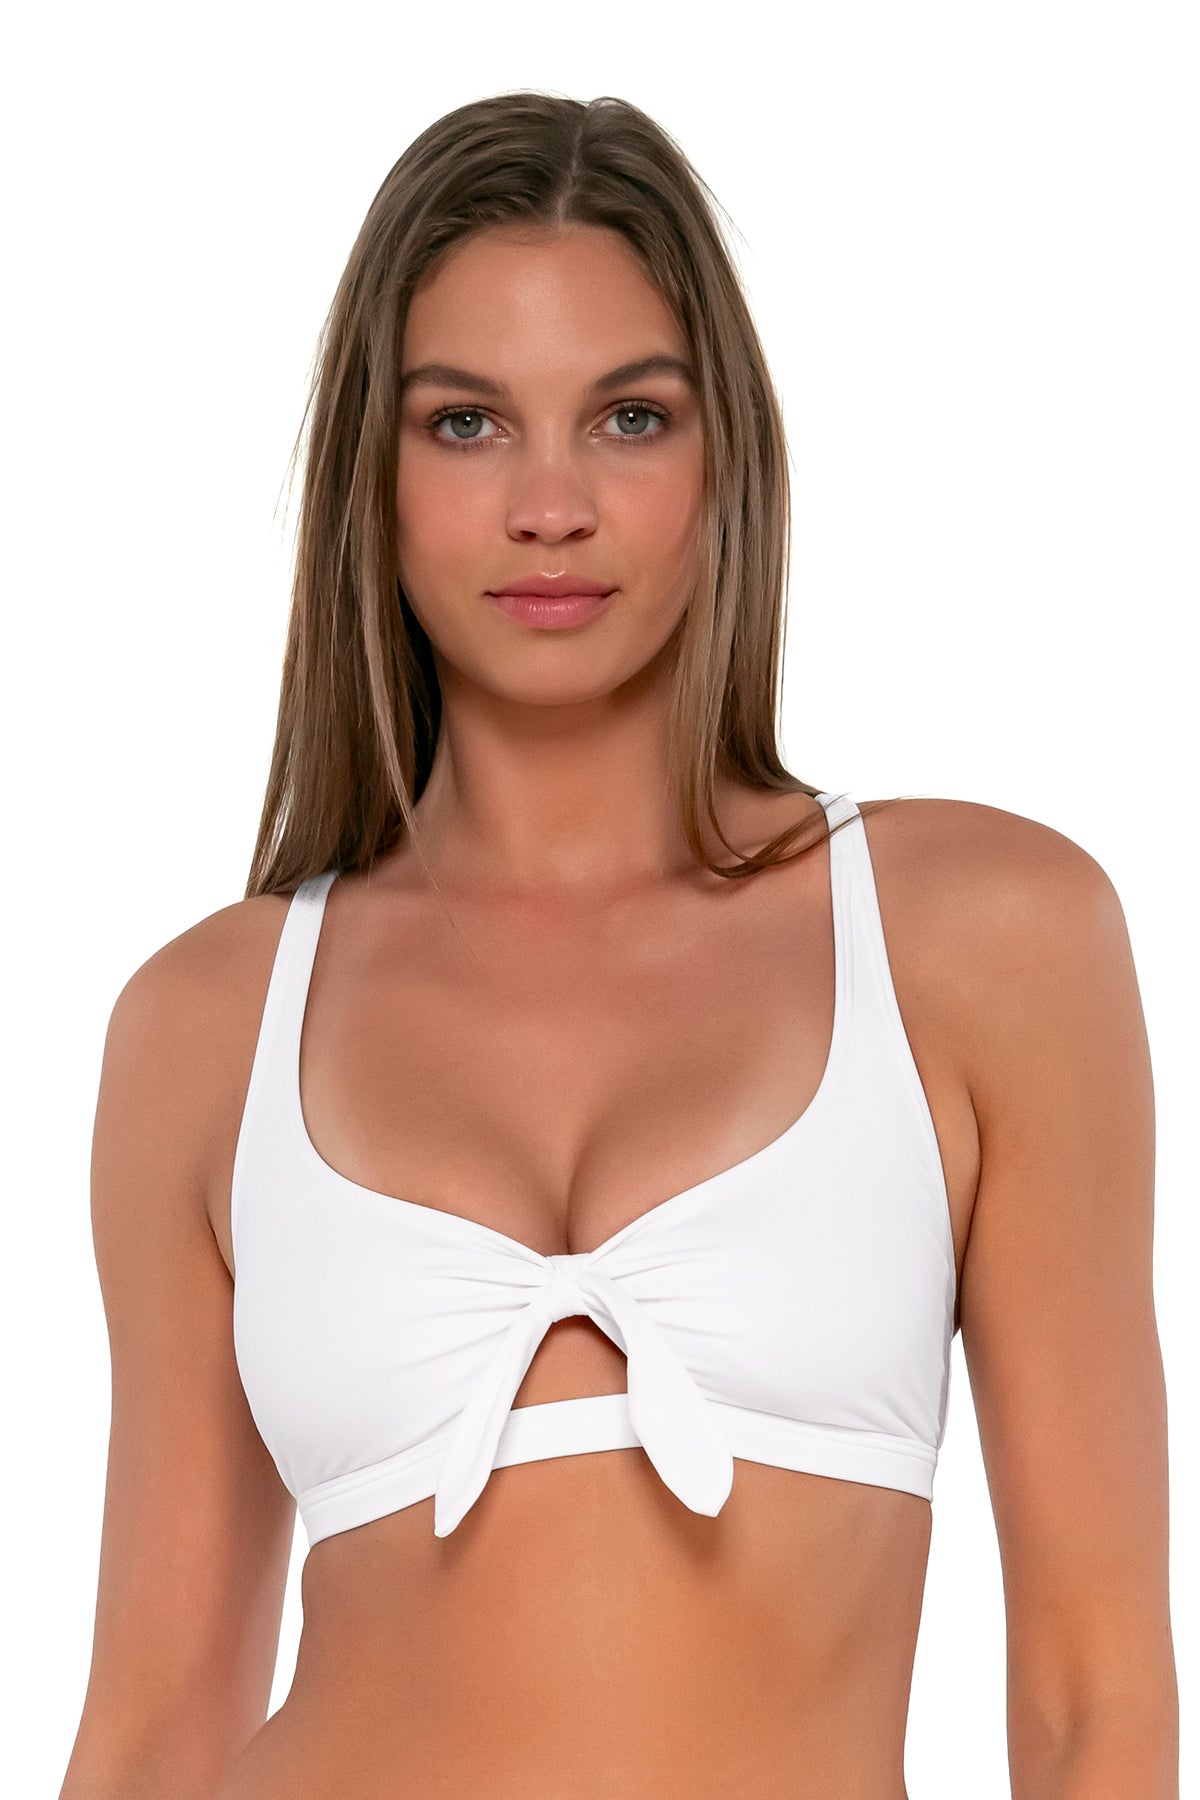 Front pose #1 of Daria wearing Sunsets White Lily Brandi Bralette Top showing keyhole front tie